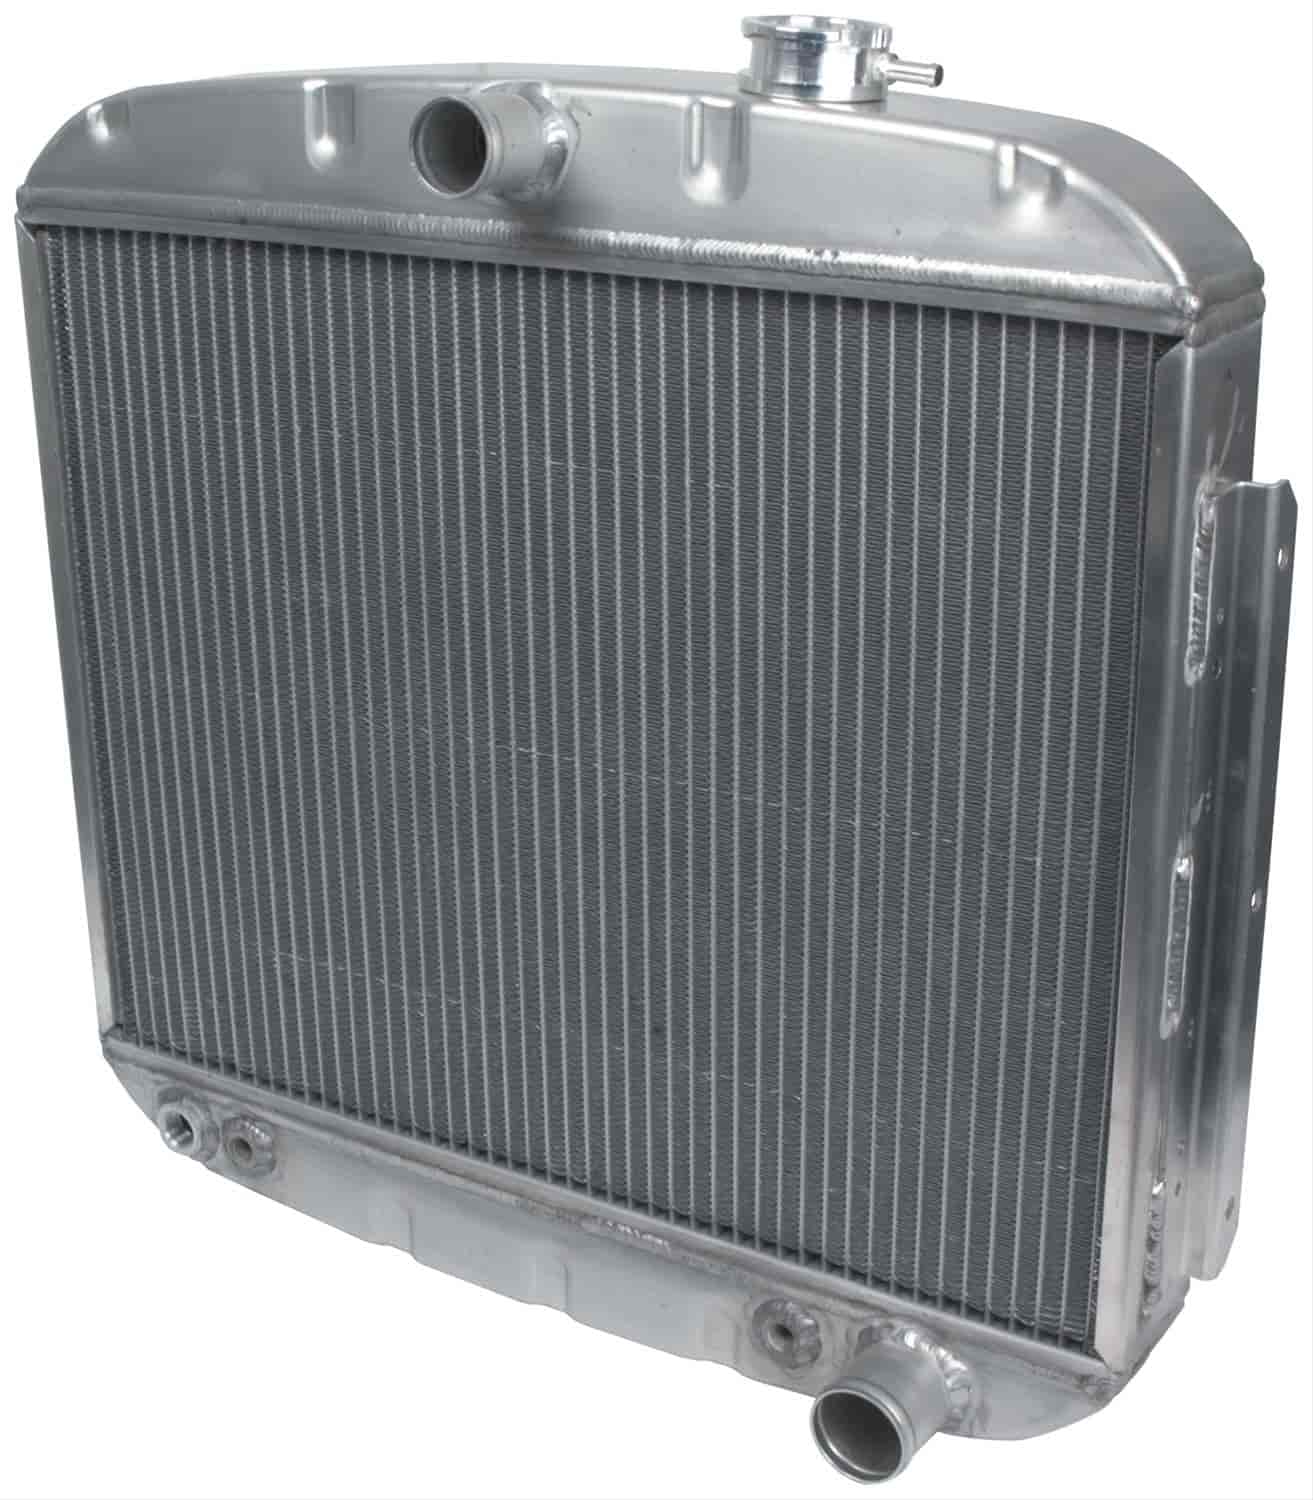 Radiator 1955-57 Chevy 8 Cyl. W/ Trans Cooler